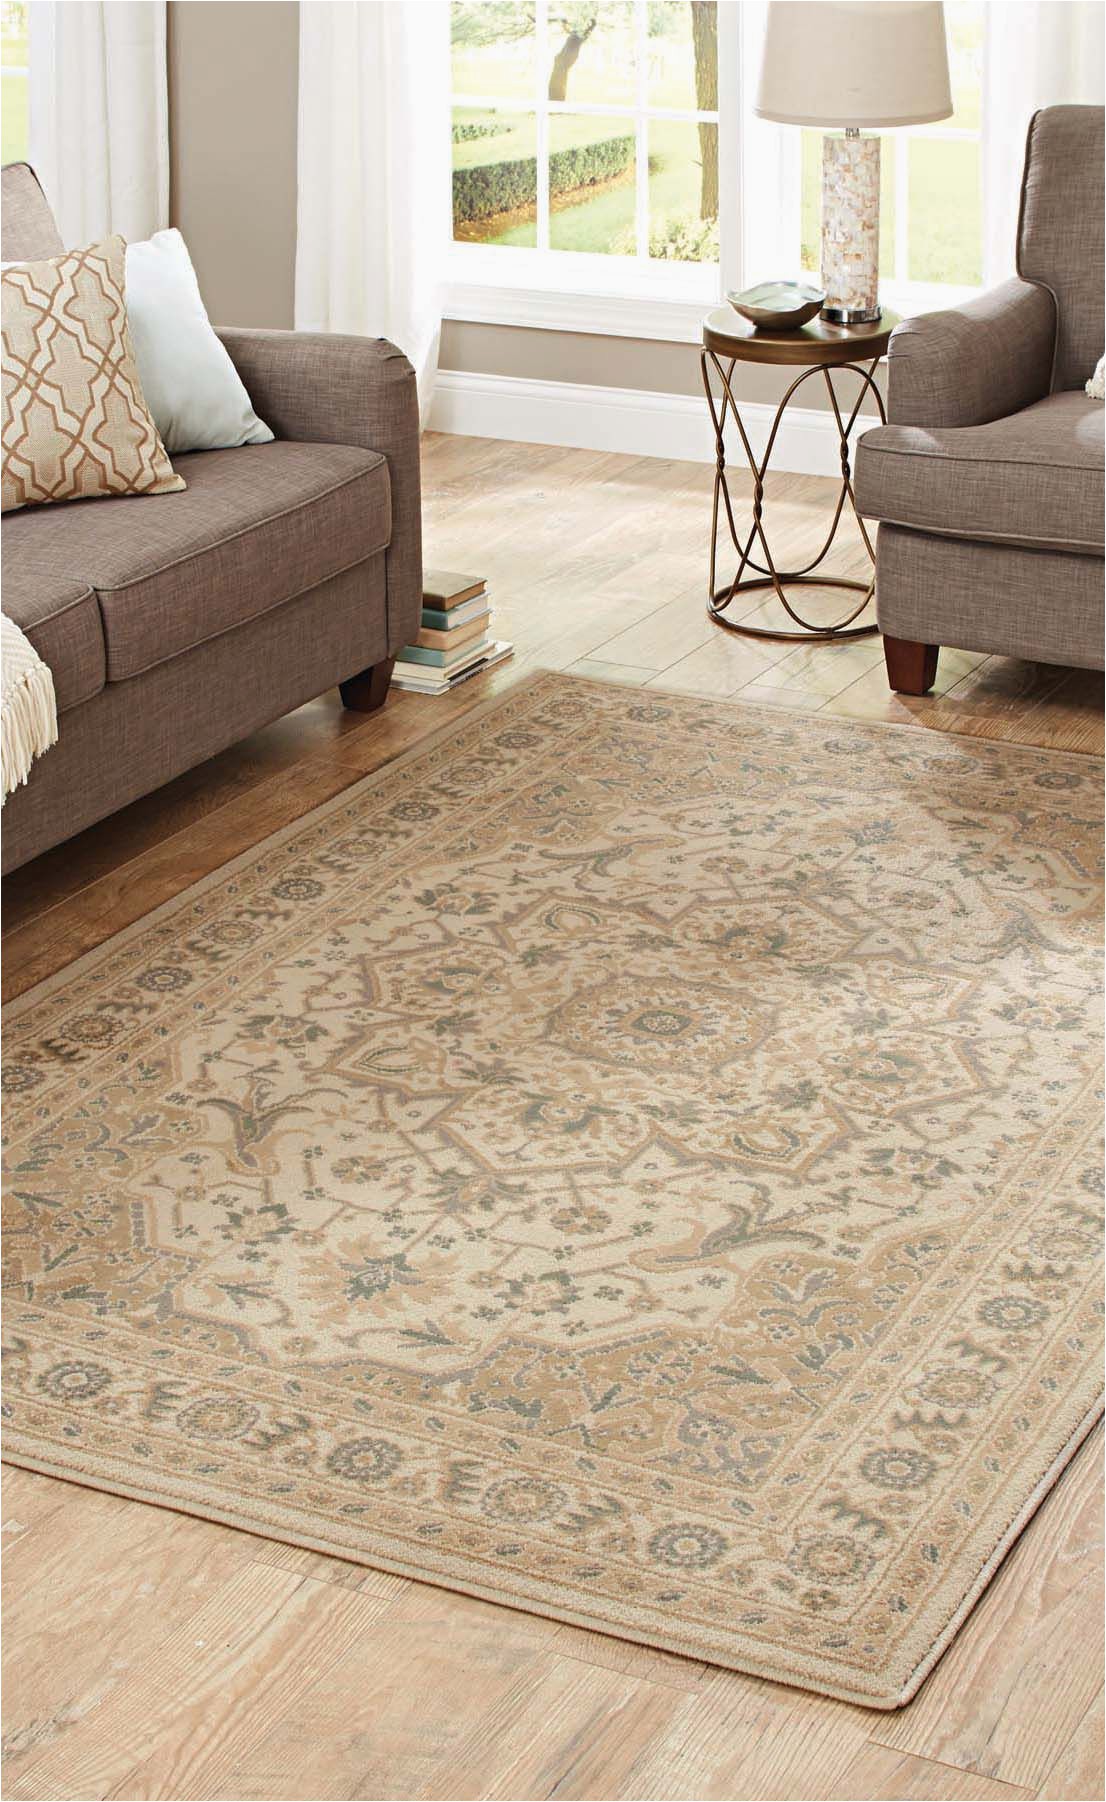 Home and Garden area Rugs Better Homes and Gardens Neutral Traditions area Rug